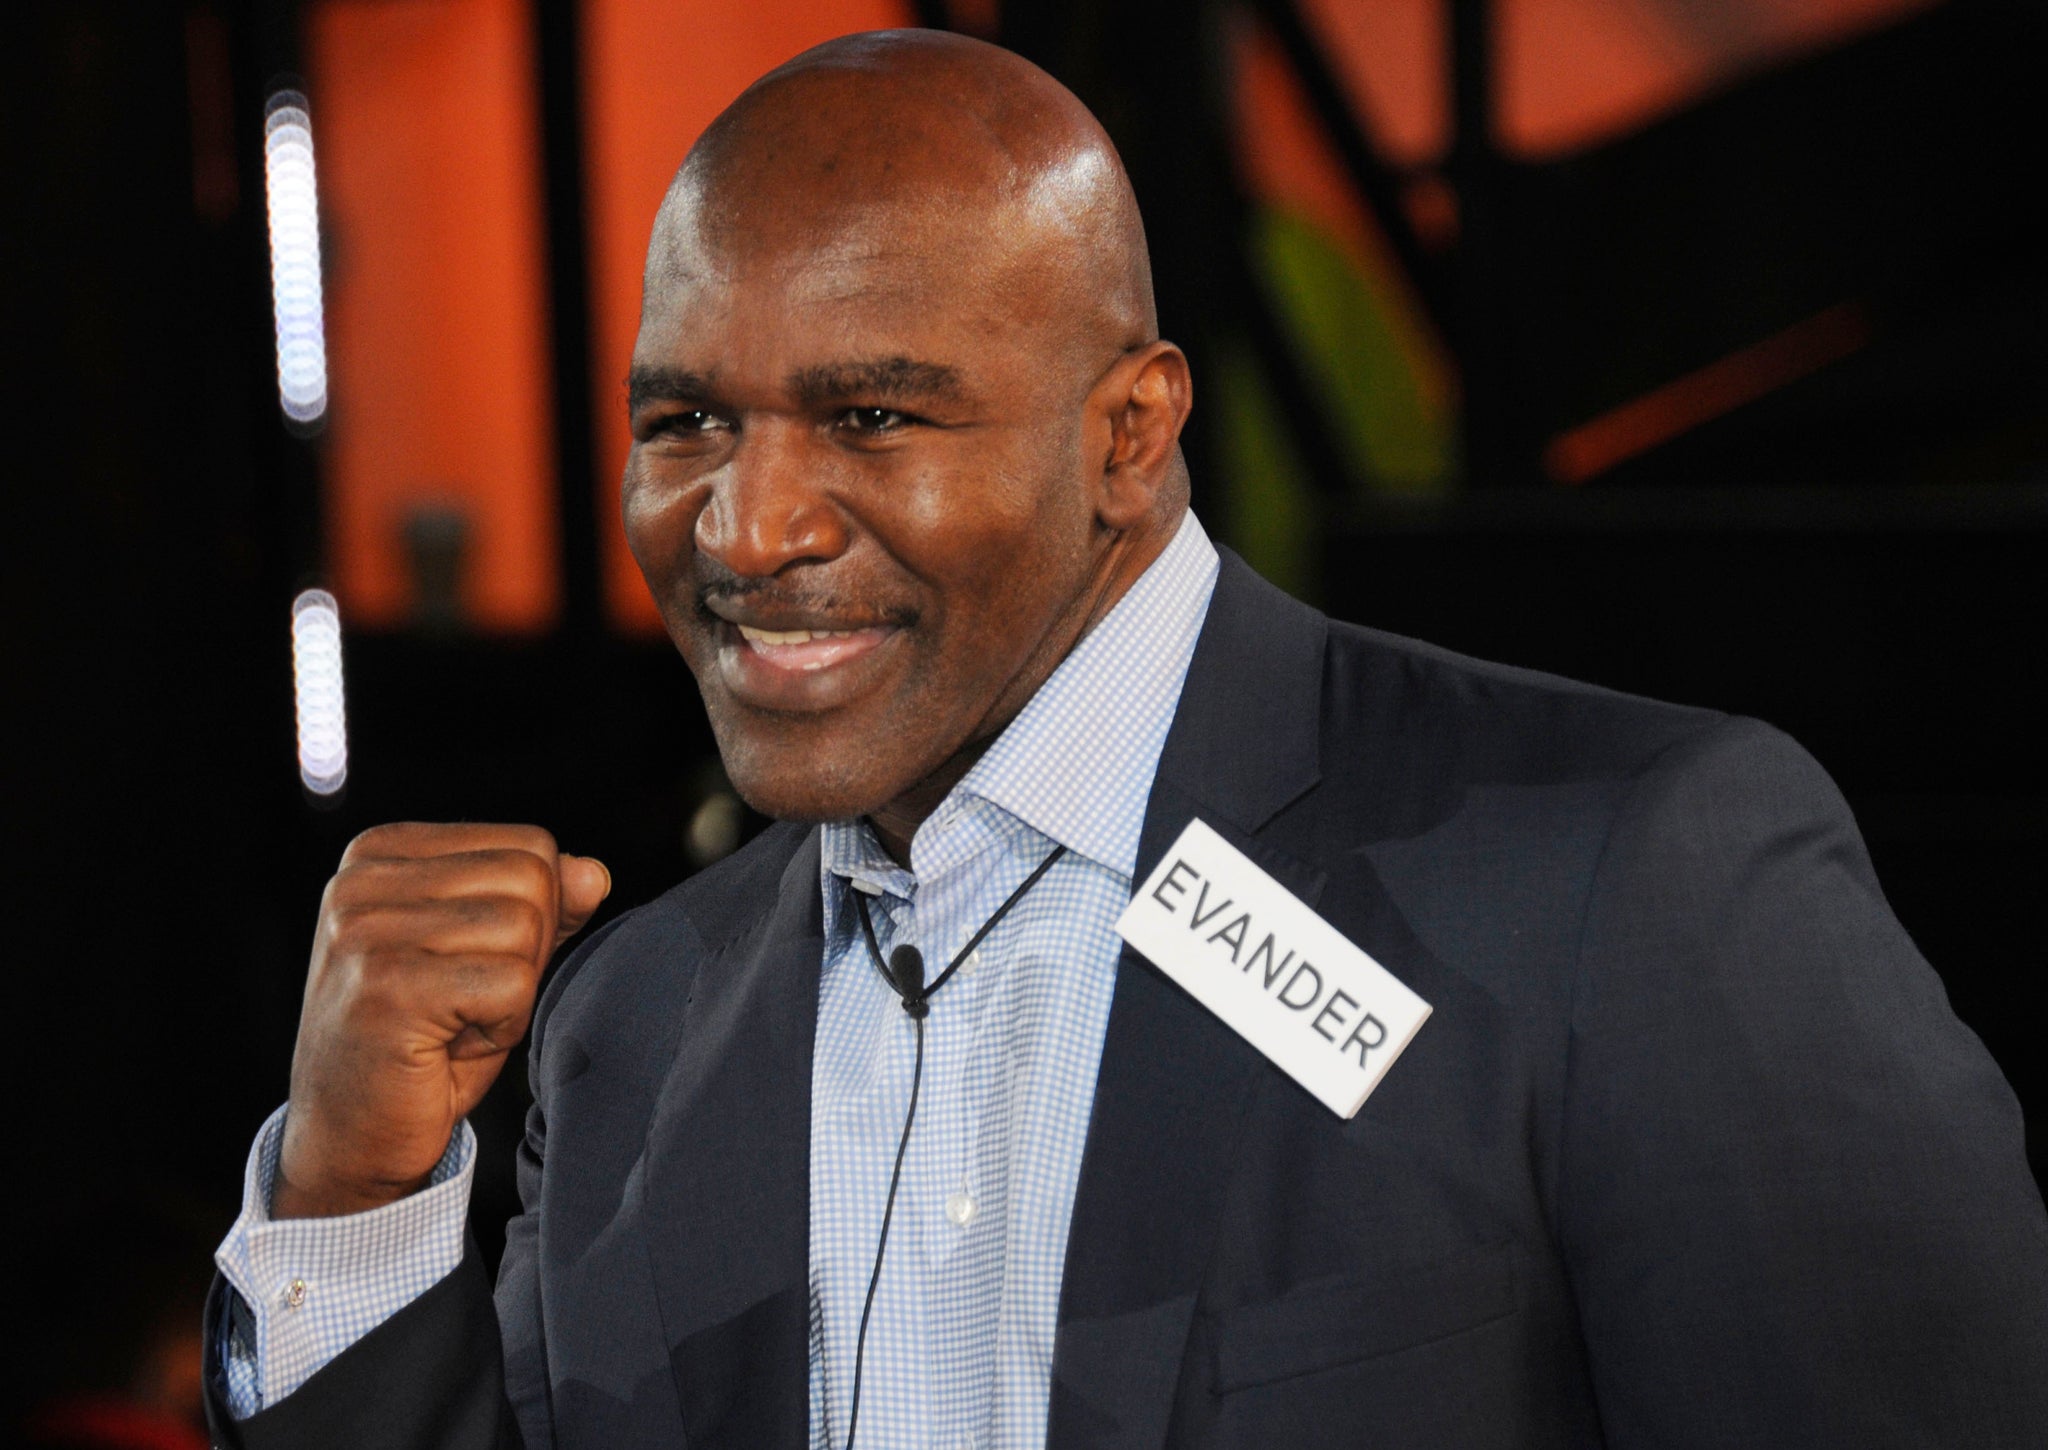 Evander Holyfield sparked controversy shortly after entering the Celebrity Big Brother house